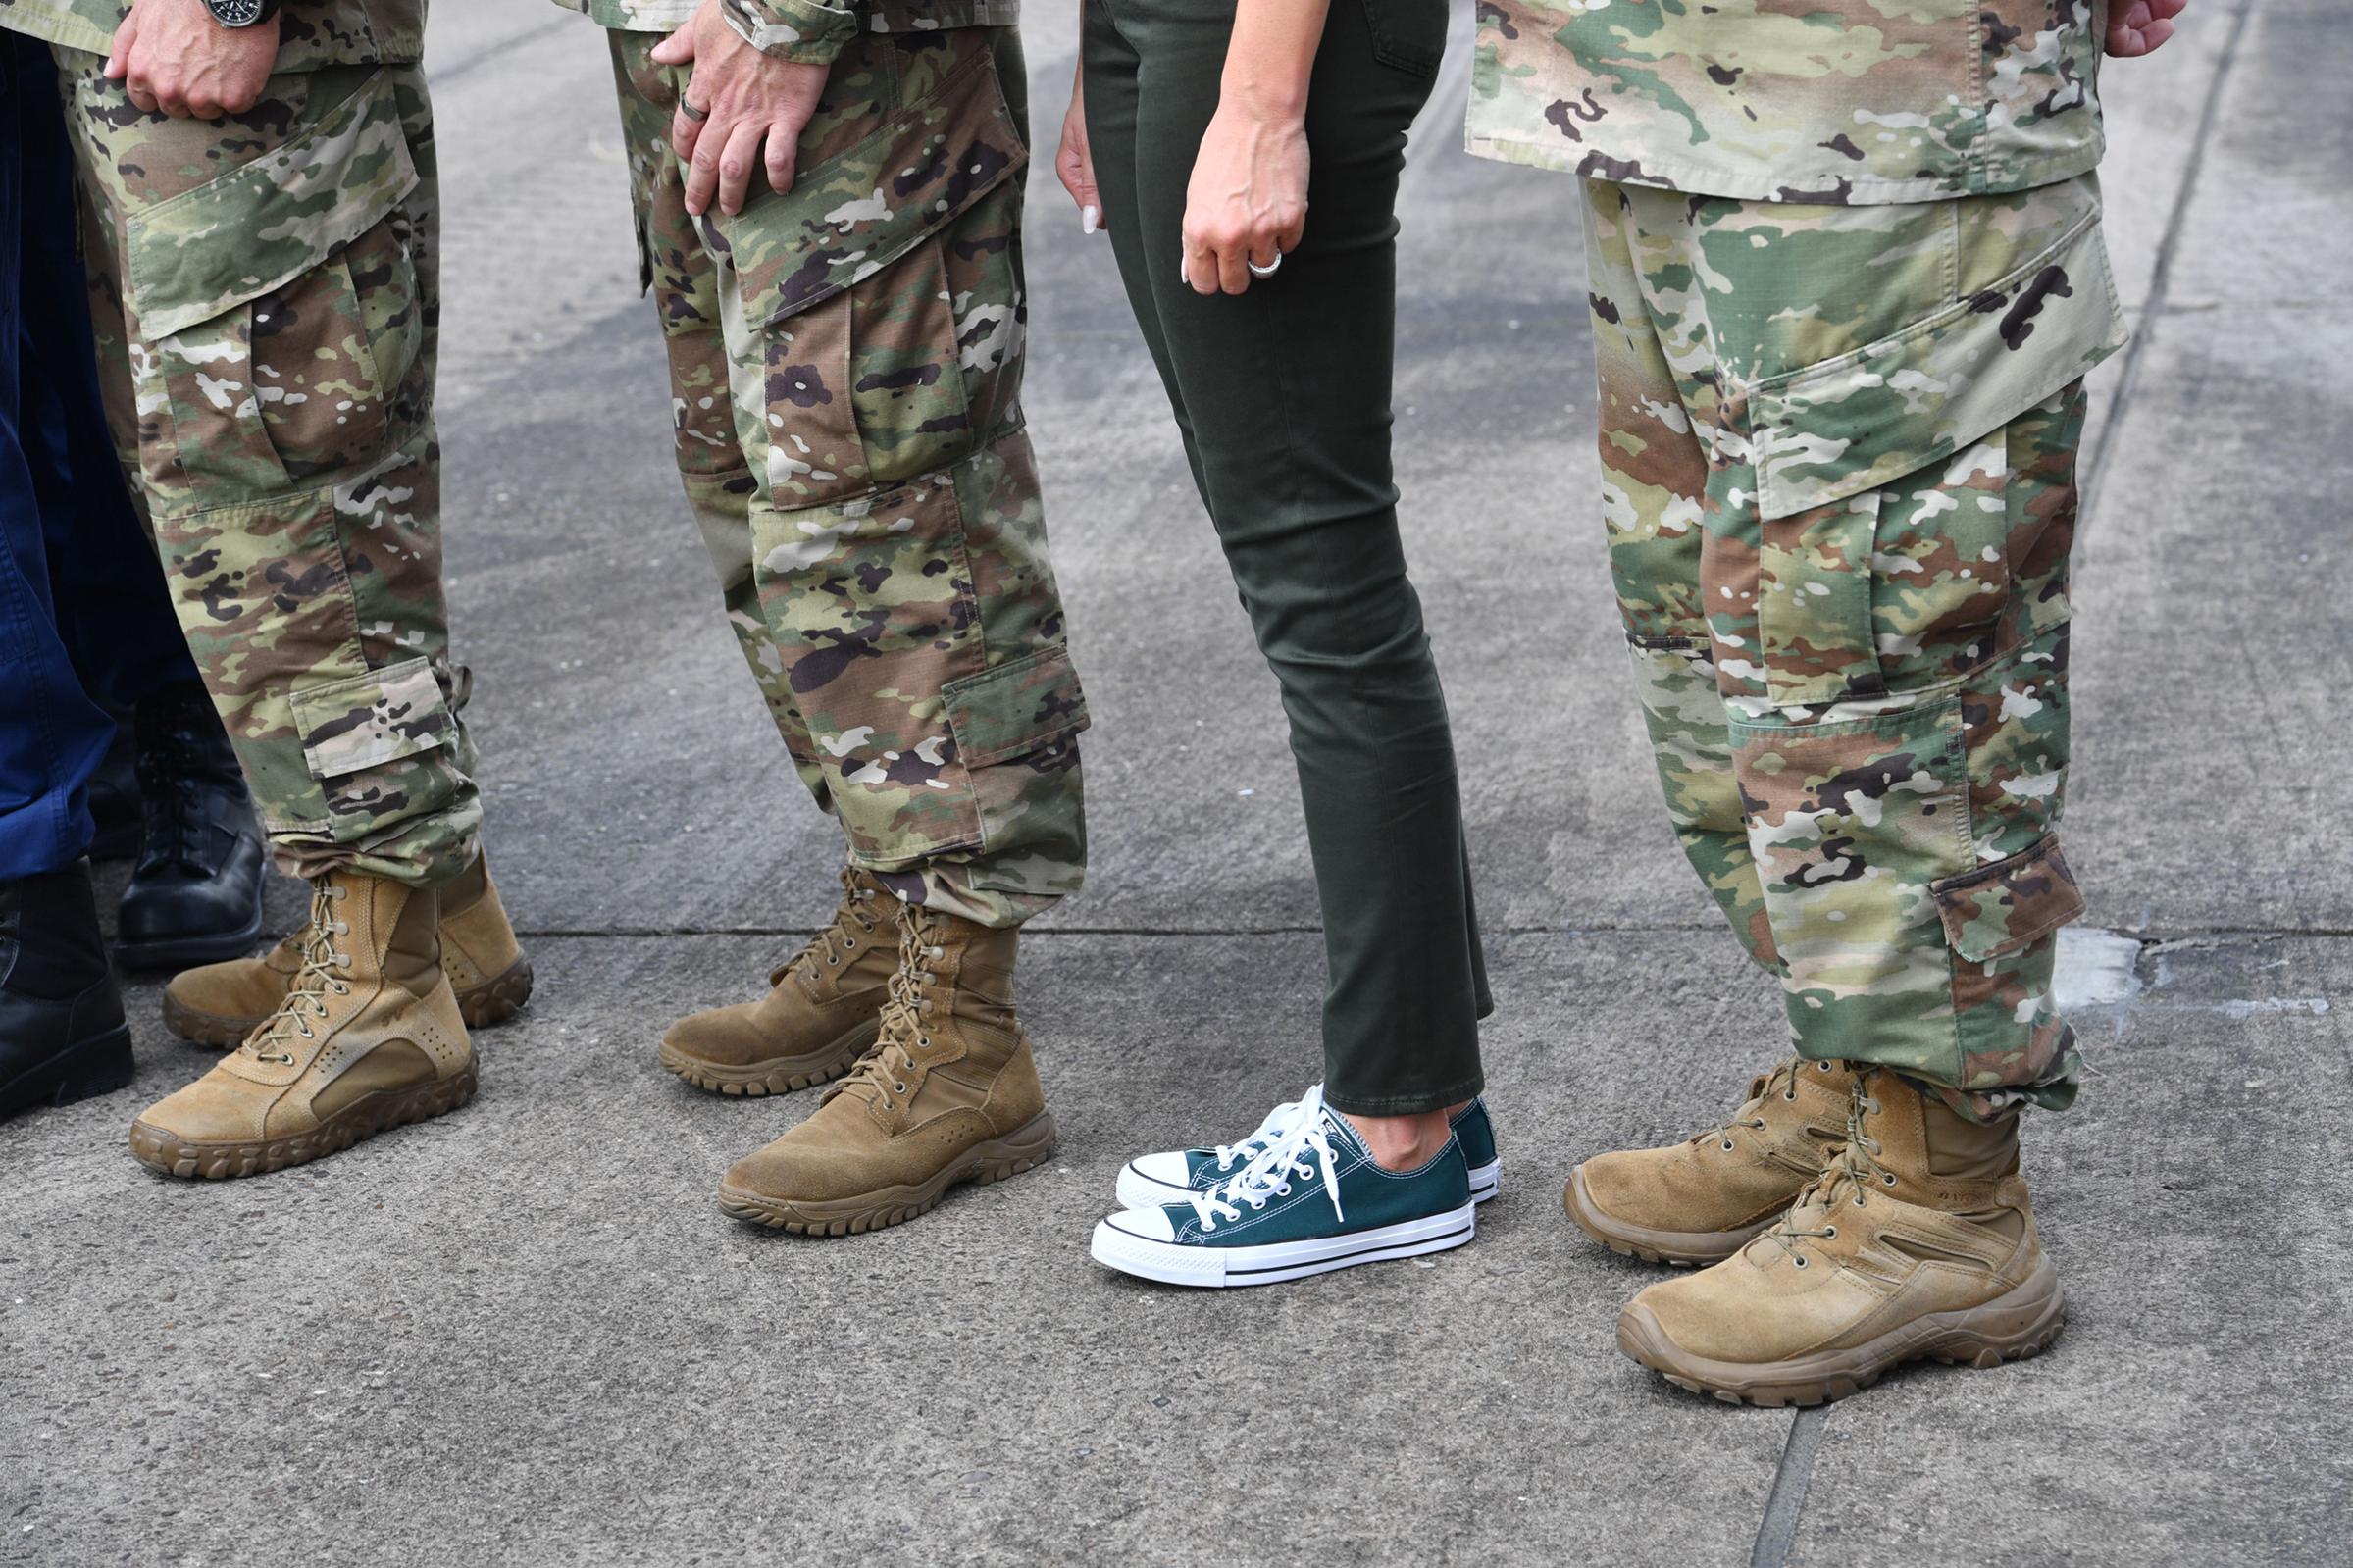 First Lady Melania Trump wearing sneakers stands with military personnel at Ellington Field on Sept. 2, 2017, before departing for Louisiana to continue their tour of areas affected by Hurricane Harvey. RM